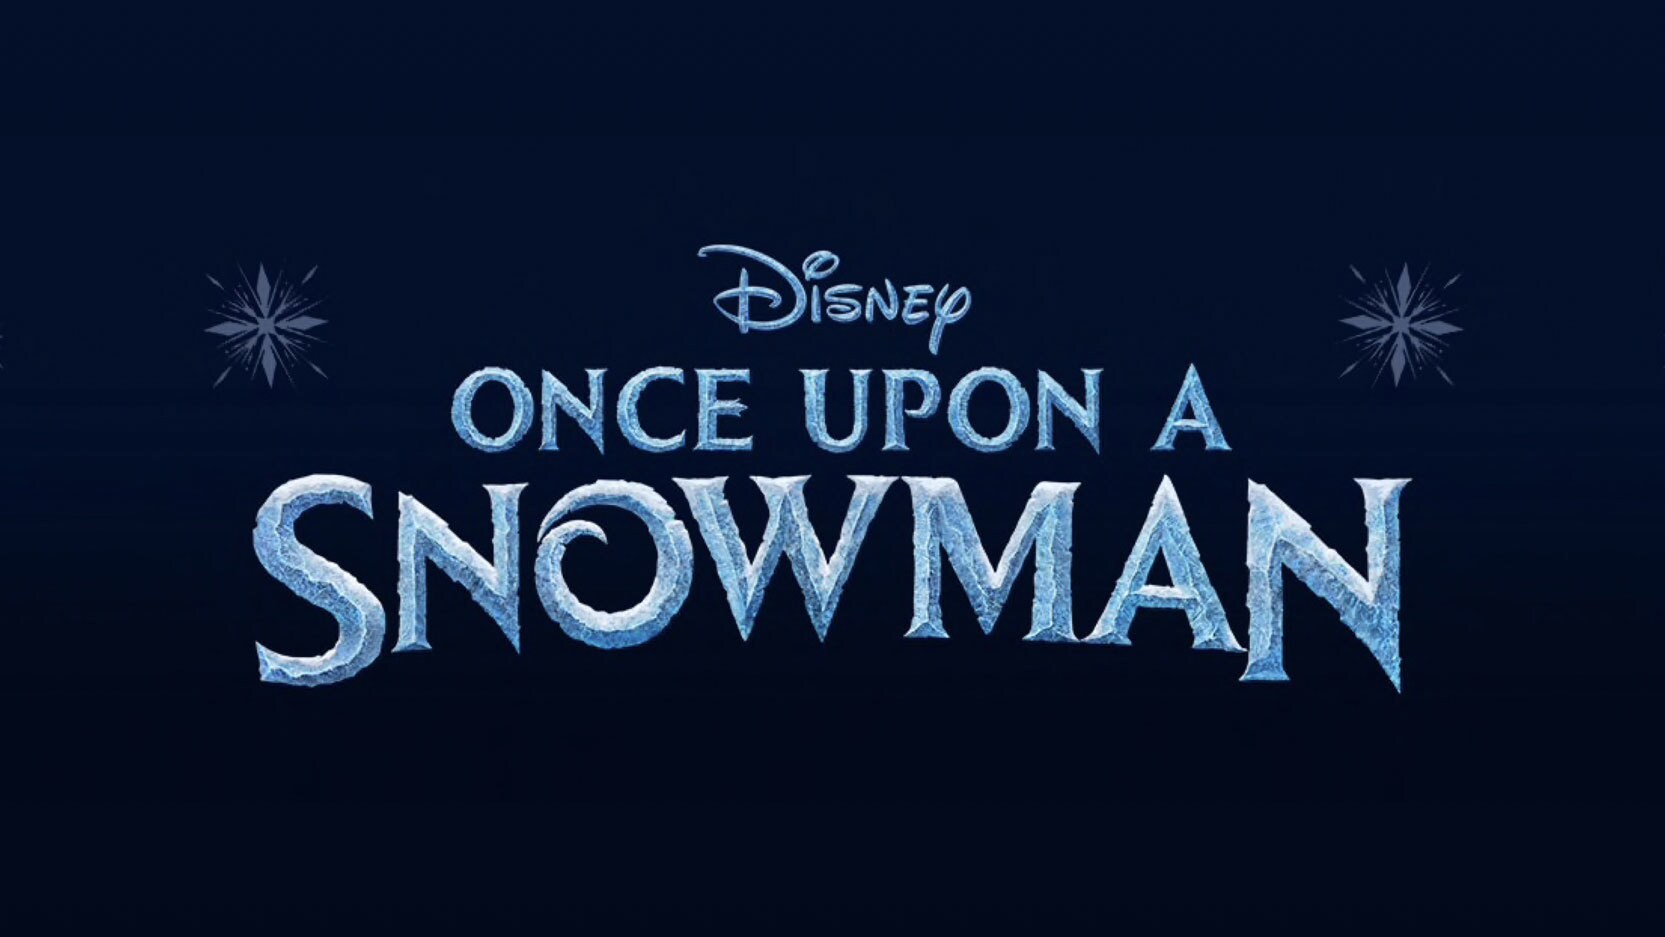 Once Upon a Snowman available to stream now exclusively on Disney+